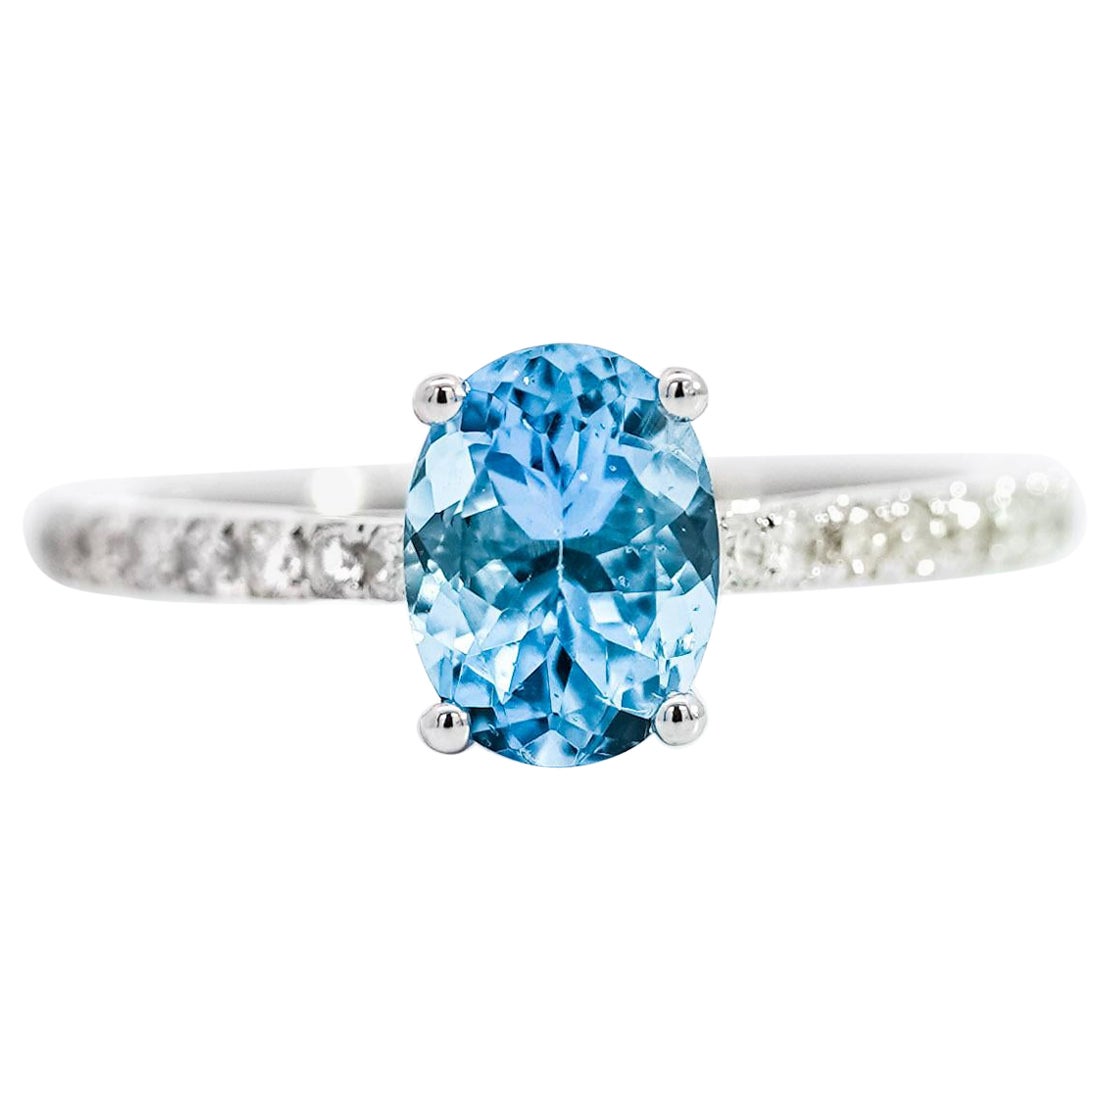 1.16 Carat Oval-Cut Aquamarine and Diamond 14K White Gold Solitaire Ring